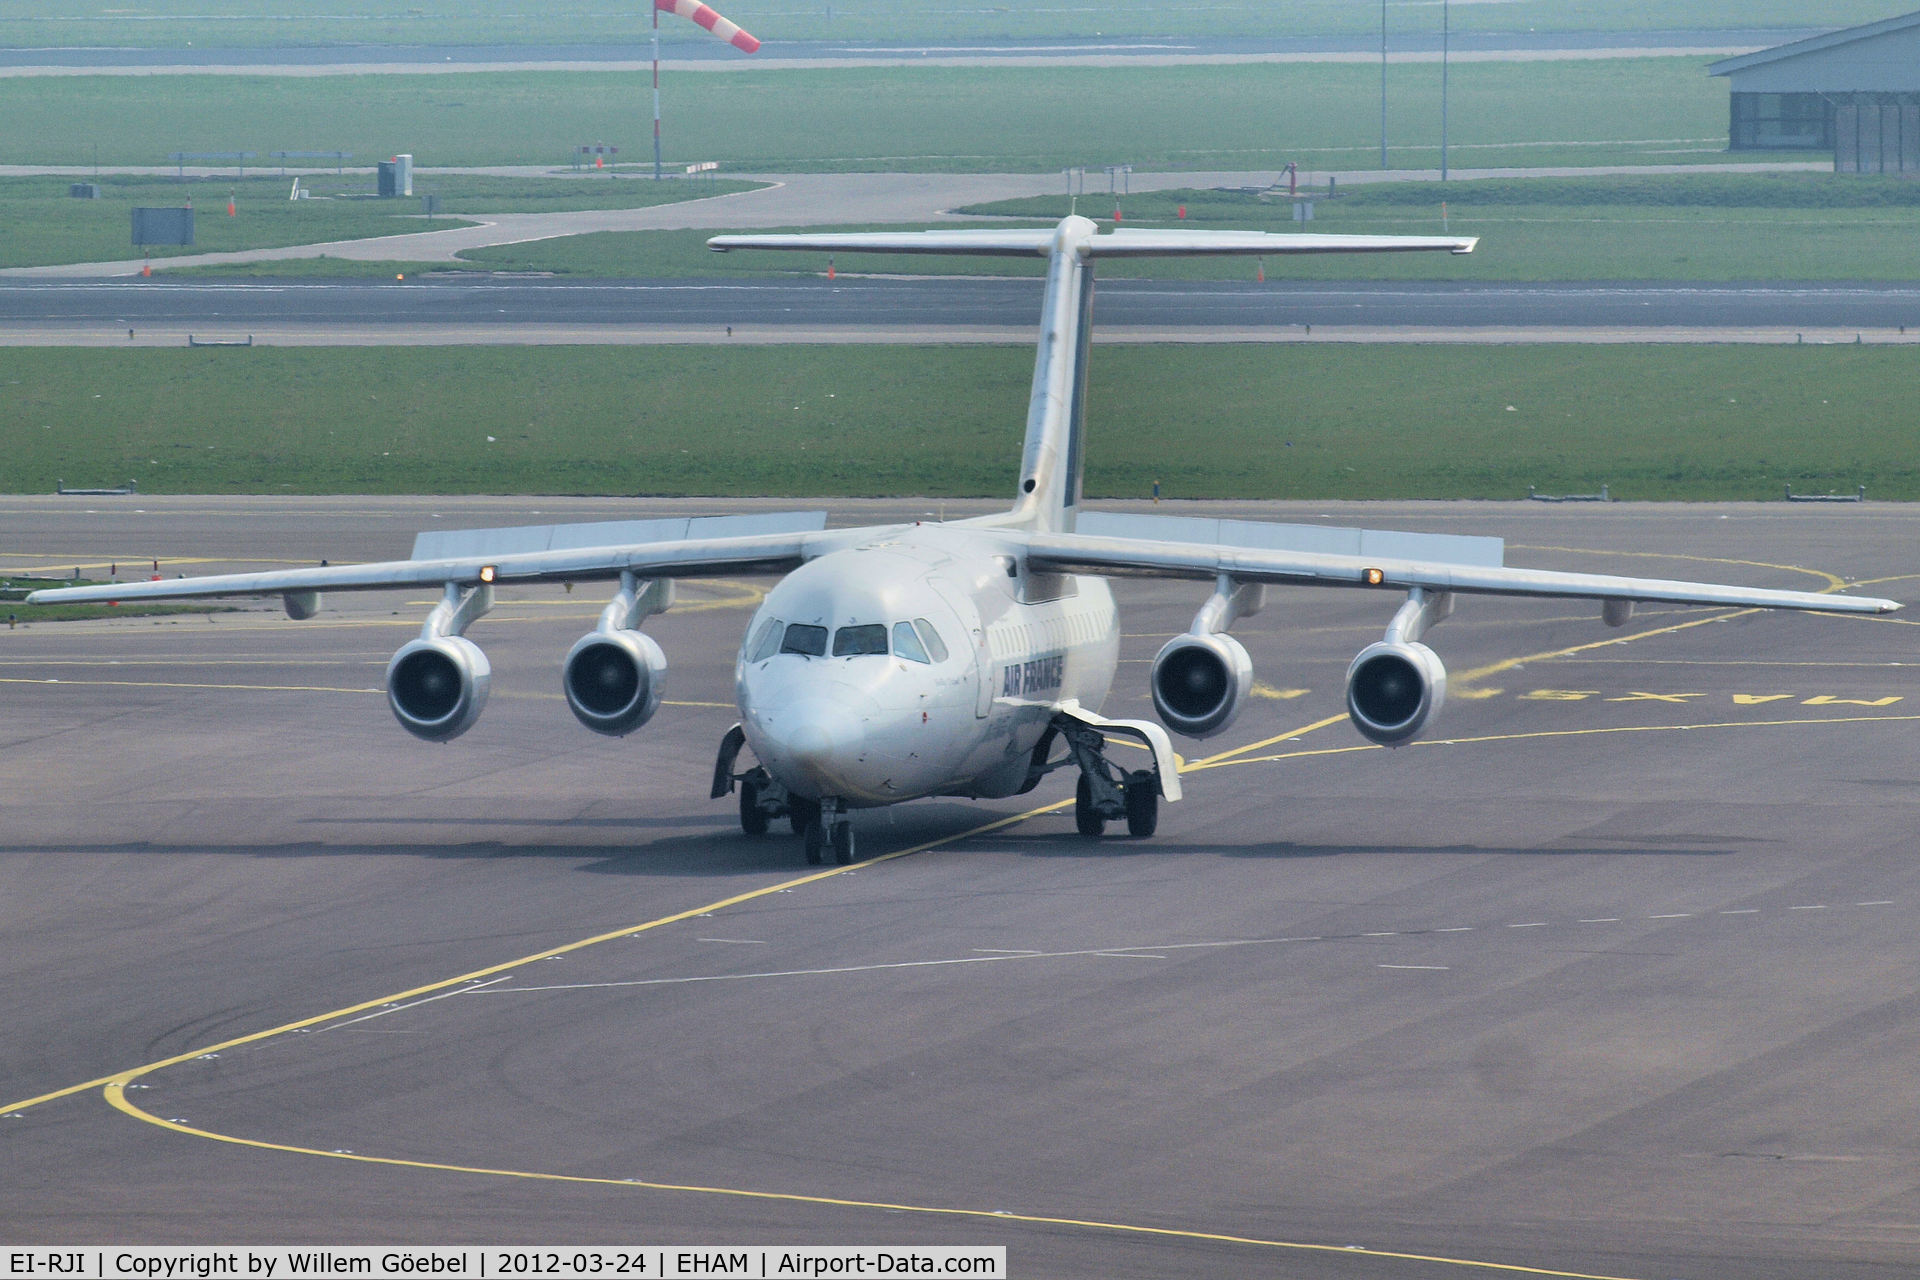 EI-RJI, 1999 British Aerospace Avro 146-RJ85A C/N E2346, Arrival on Schiphol Airport and taxi to the gate